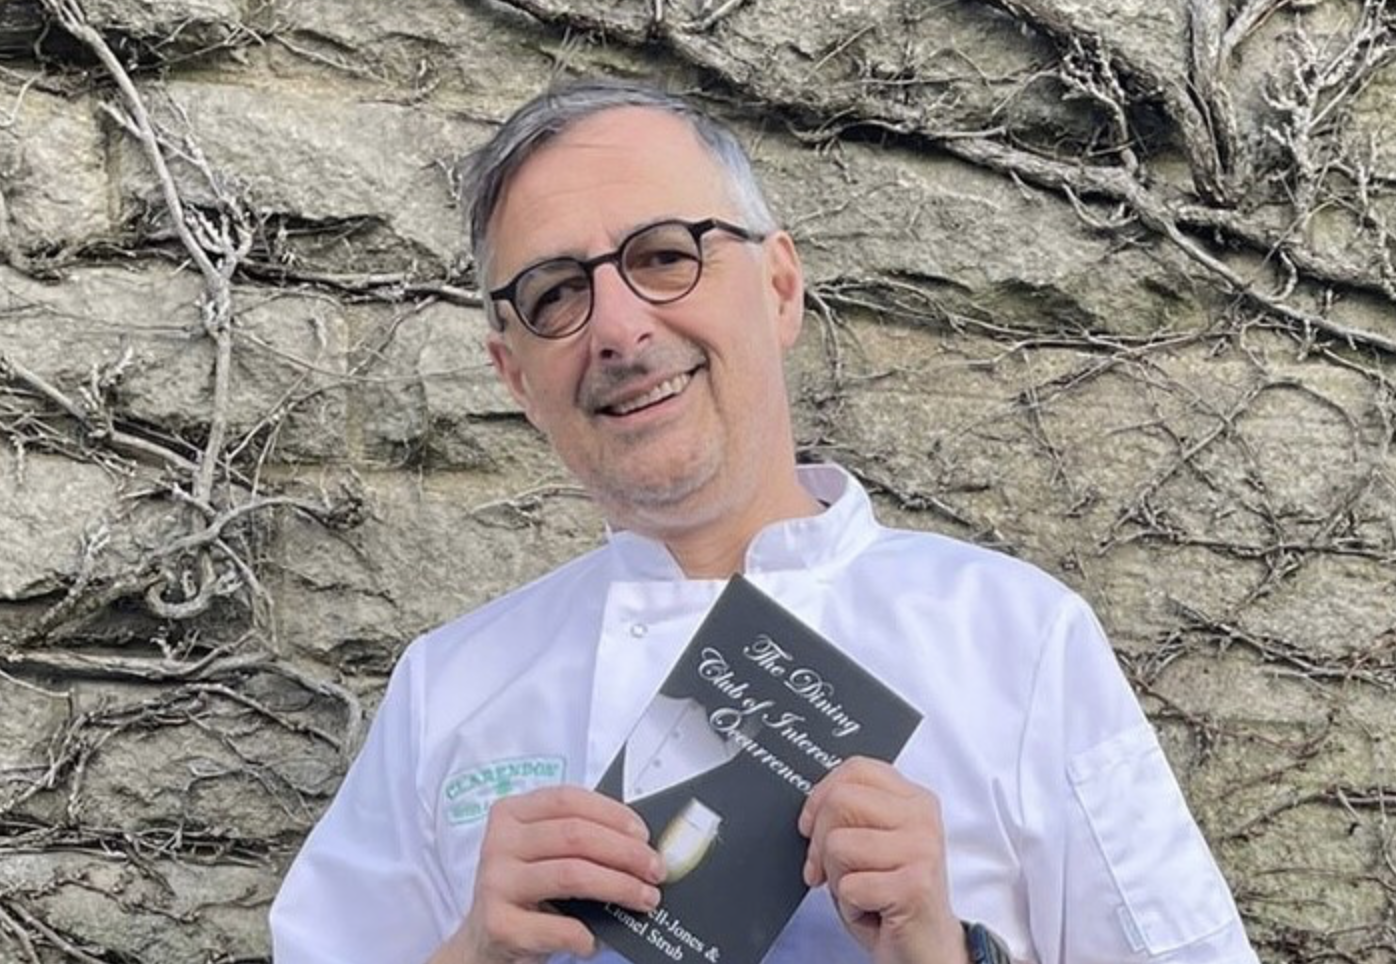 Yorkshire chef launches new book - a blend of fiction and food